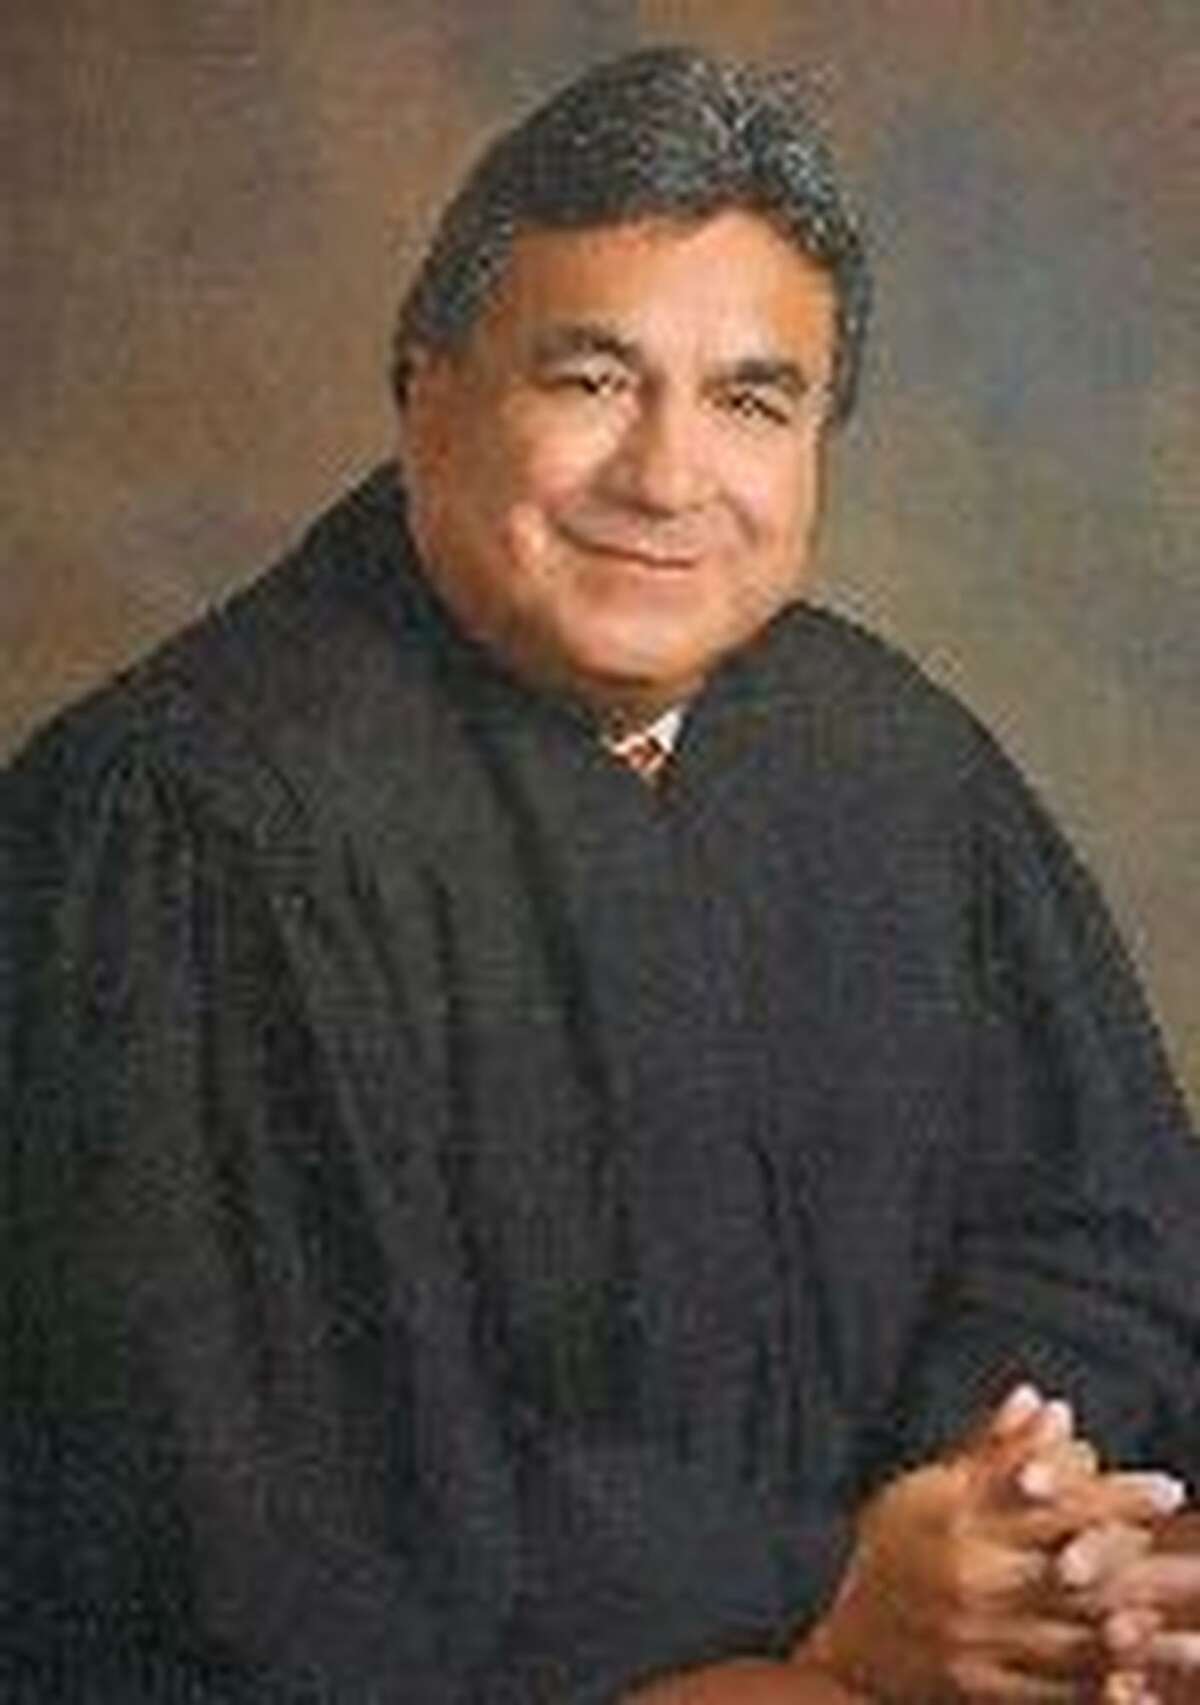 District Judge Rodolfo “Rudy” Delgado is seen in an undated photo taken from the 93rd District Court website. He is charged with bribery, according to FBI officials.